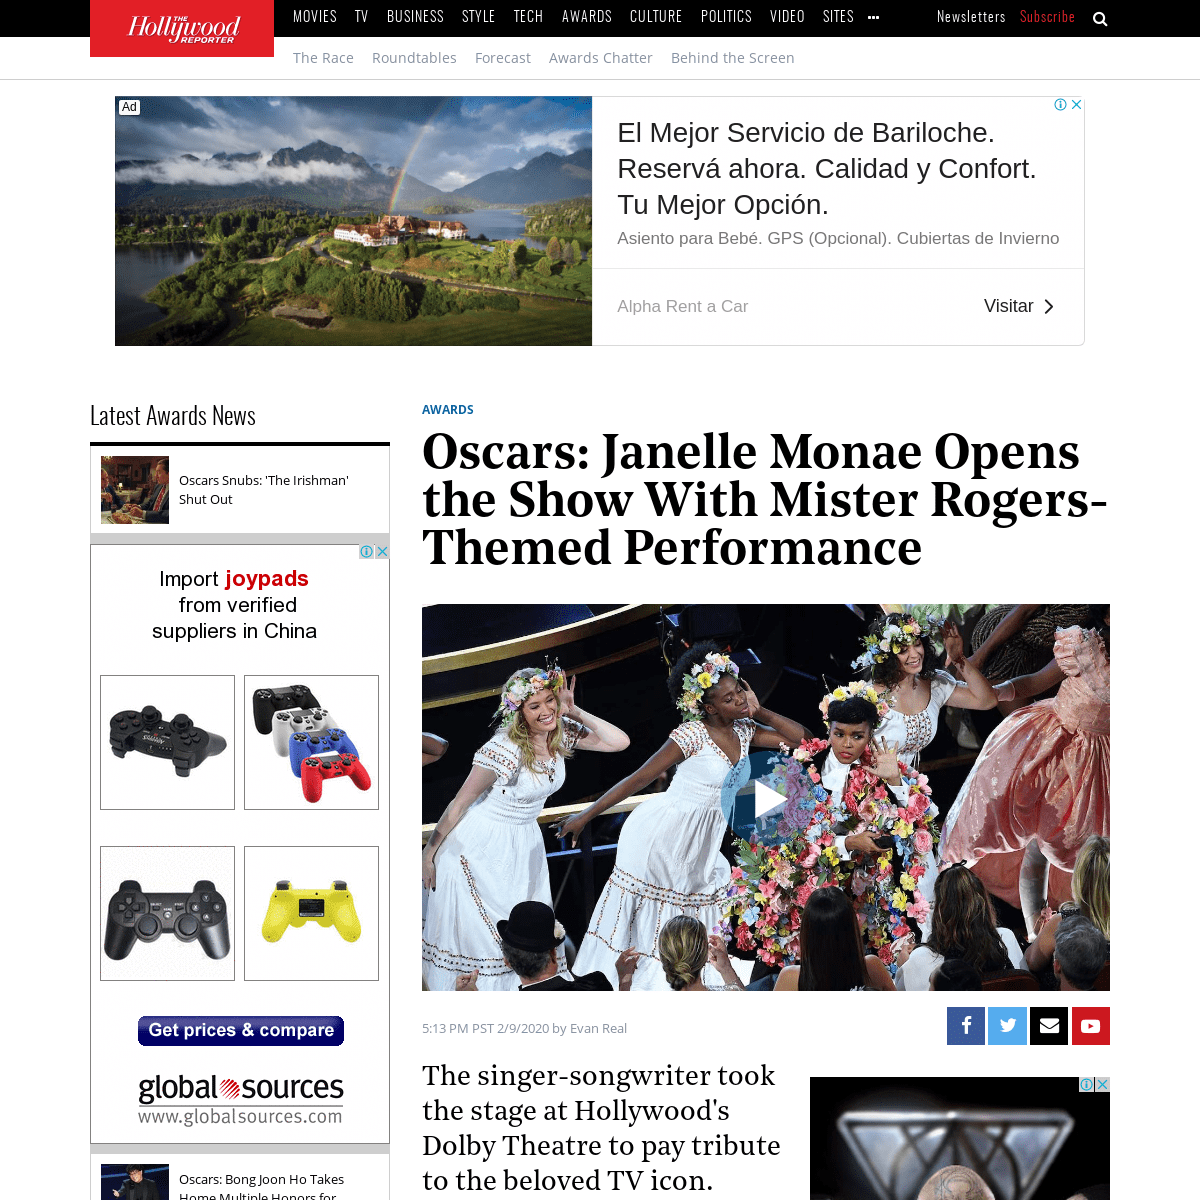 A complete backup of www.hollywoodreporter.com/news/janelle-monae-opens-oscars-mister-rogers-themed-performance-1278046